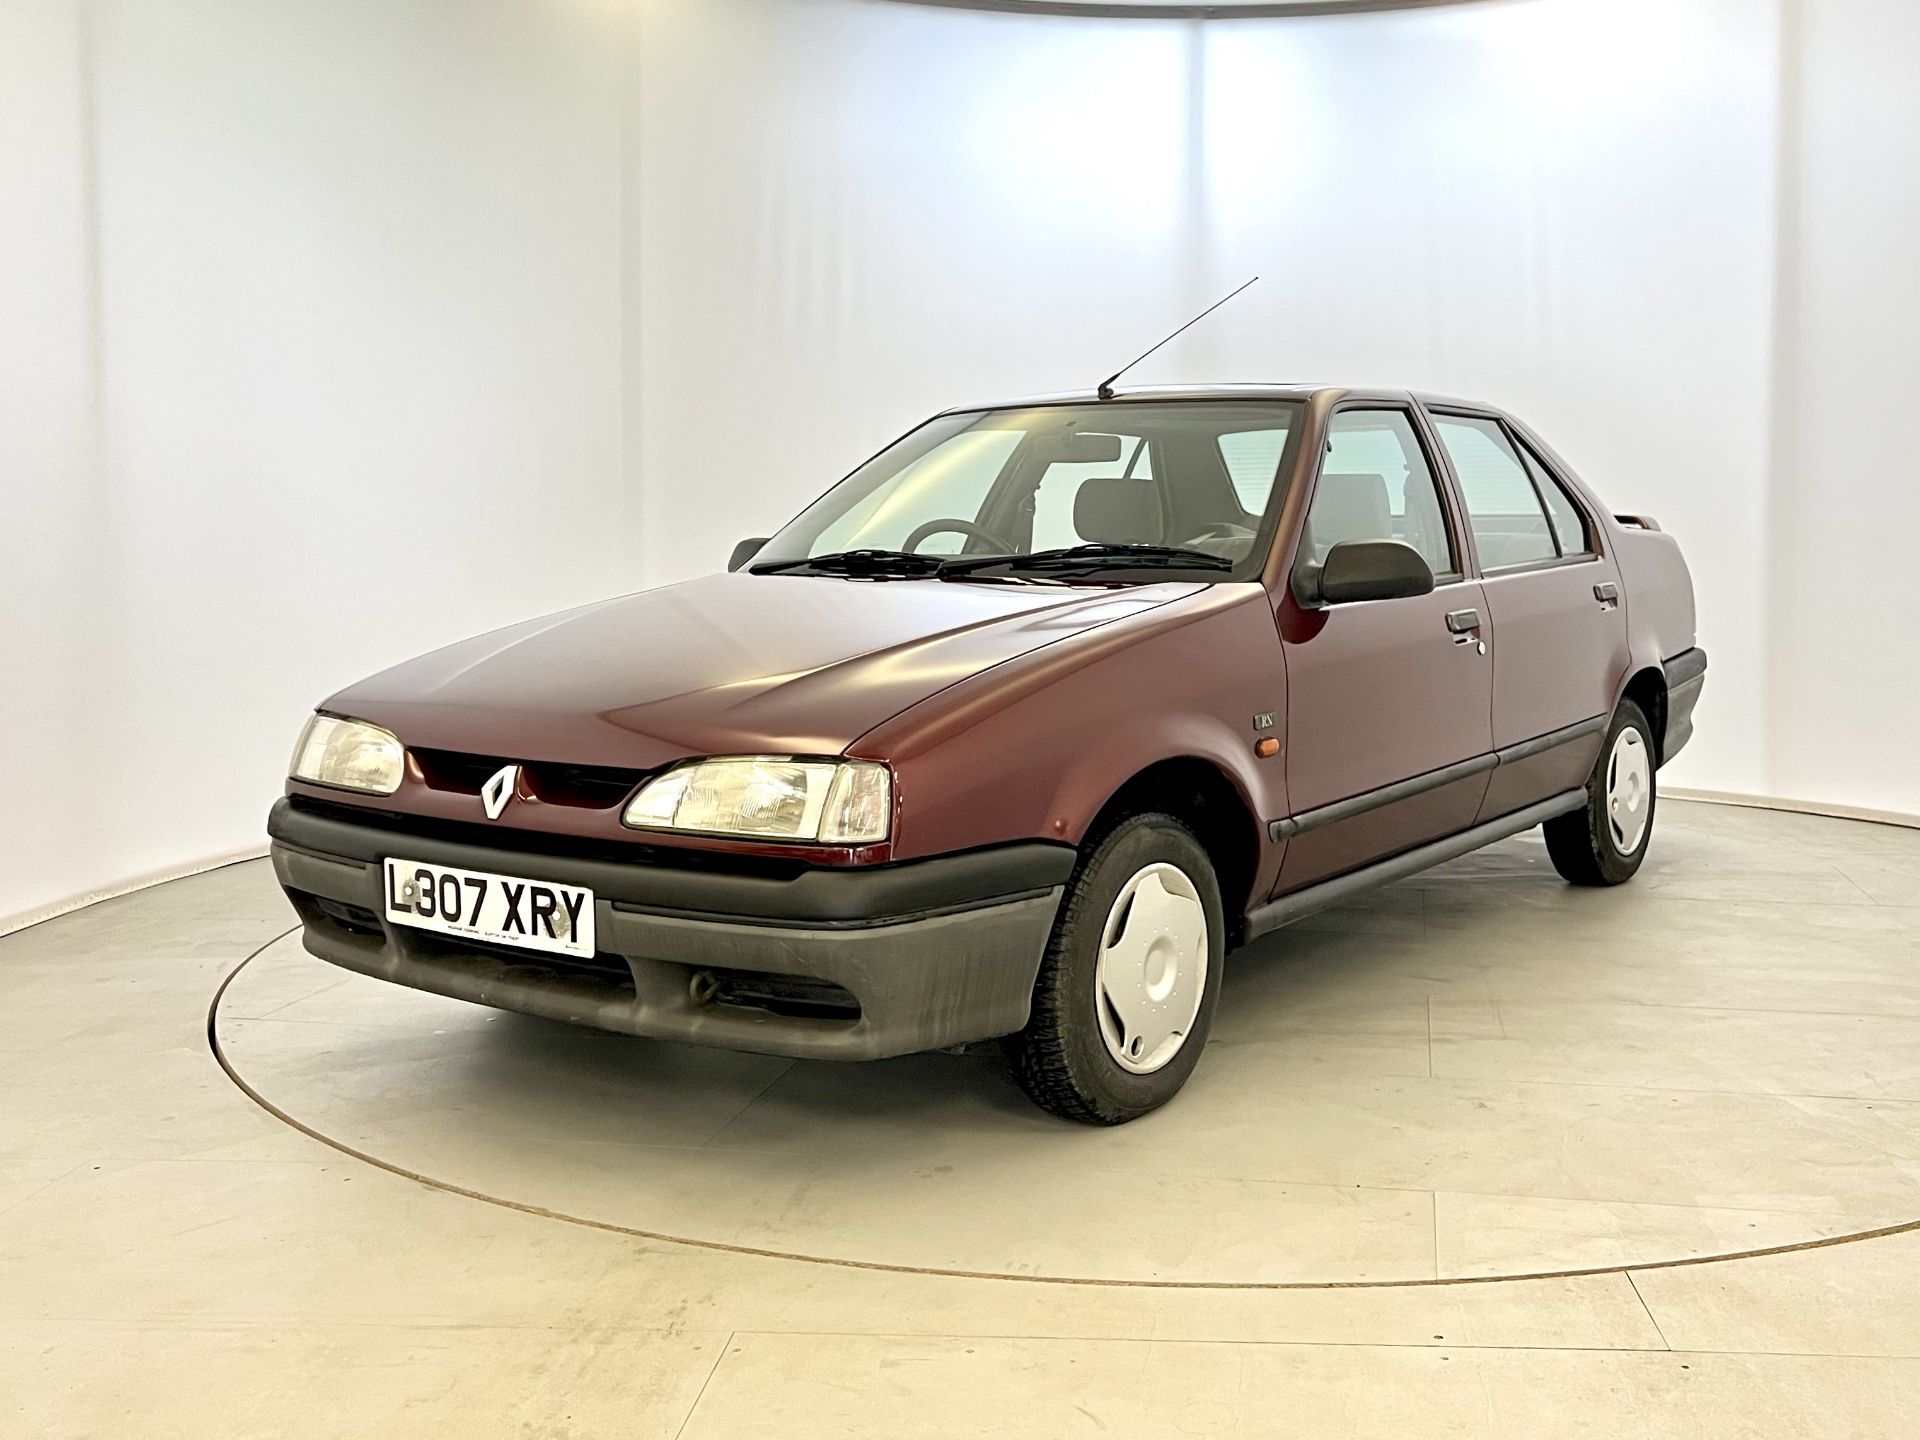 Renault 19 - Image 3 of 38